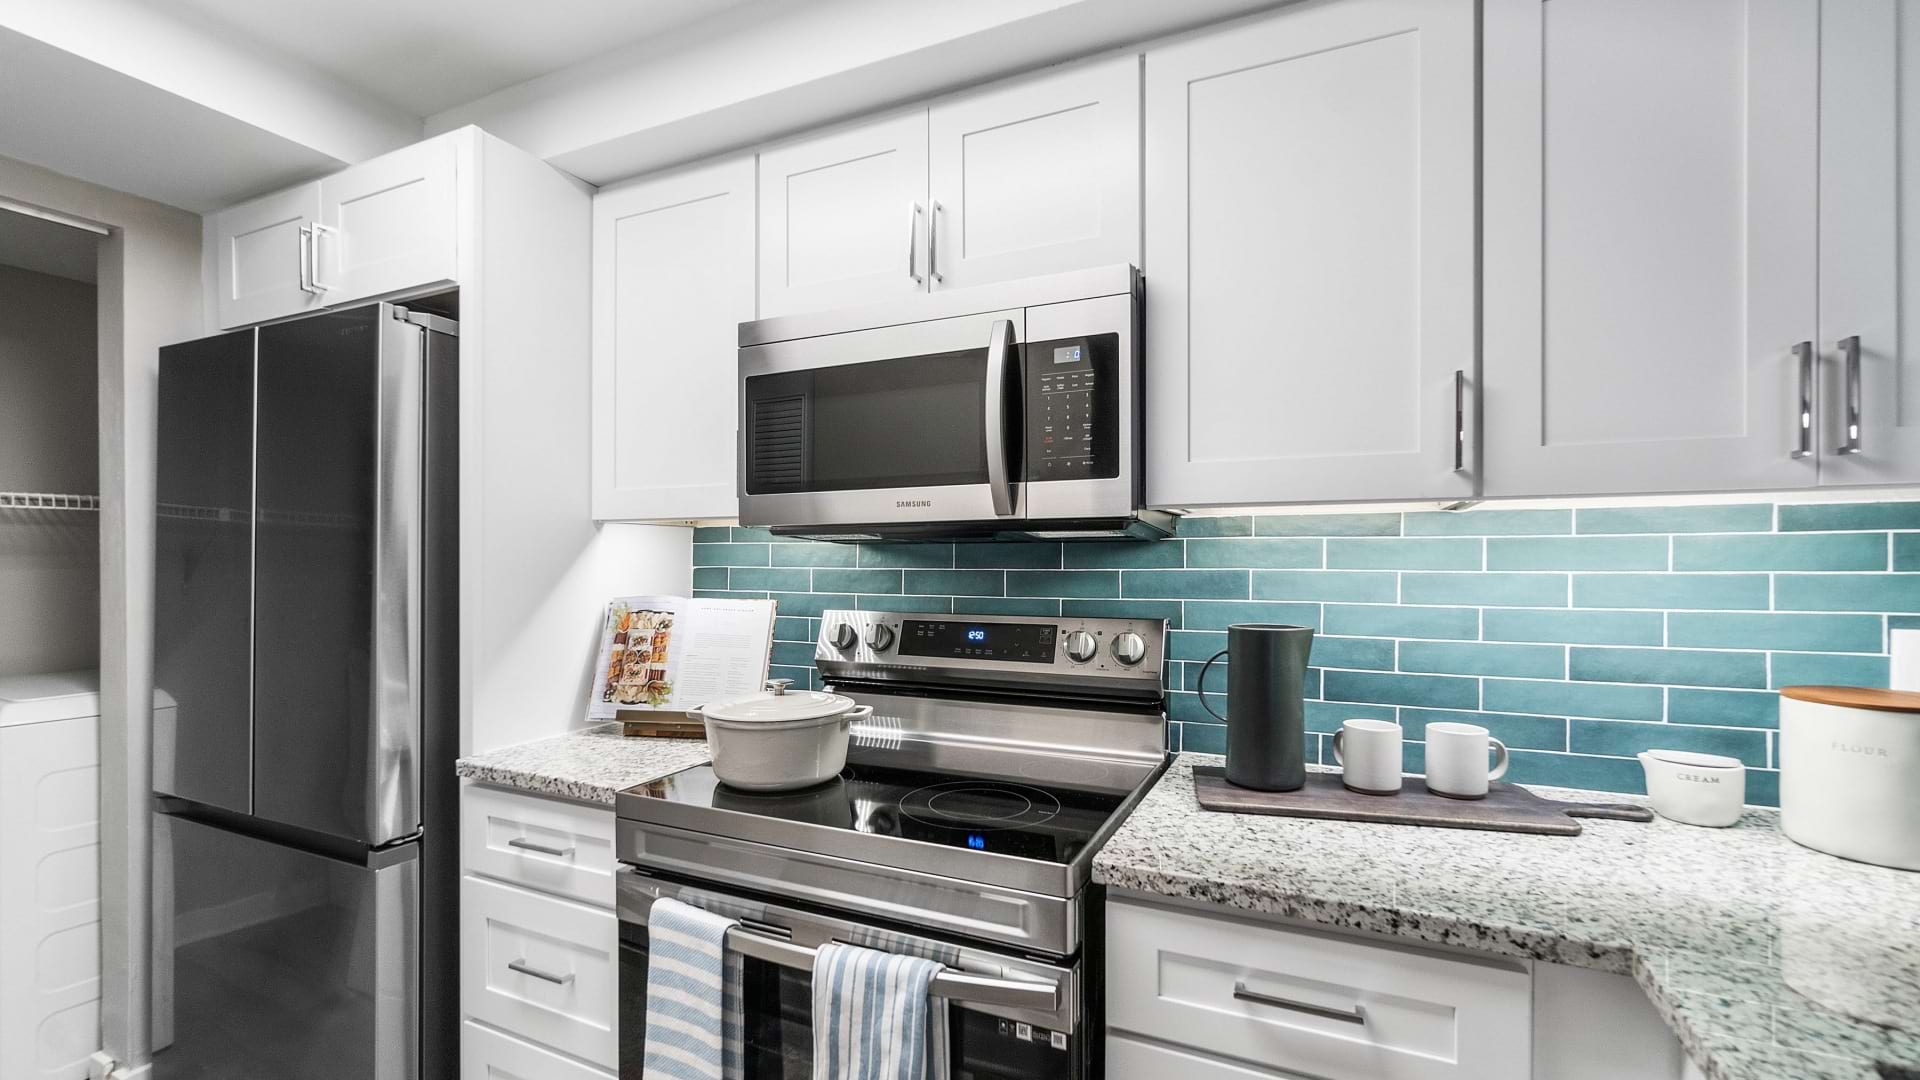 Kitchen with Granite Countertops at Our West Kendall Apartments for Rent